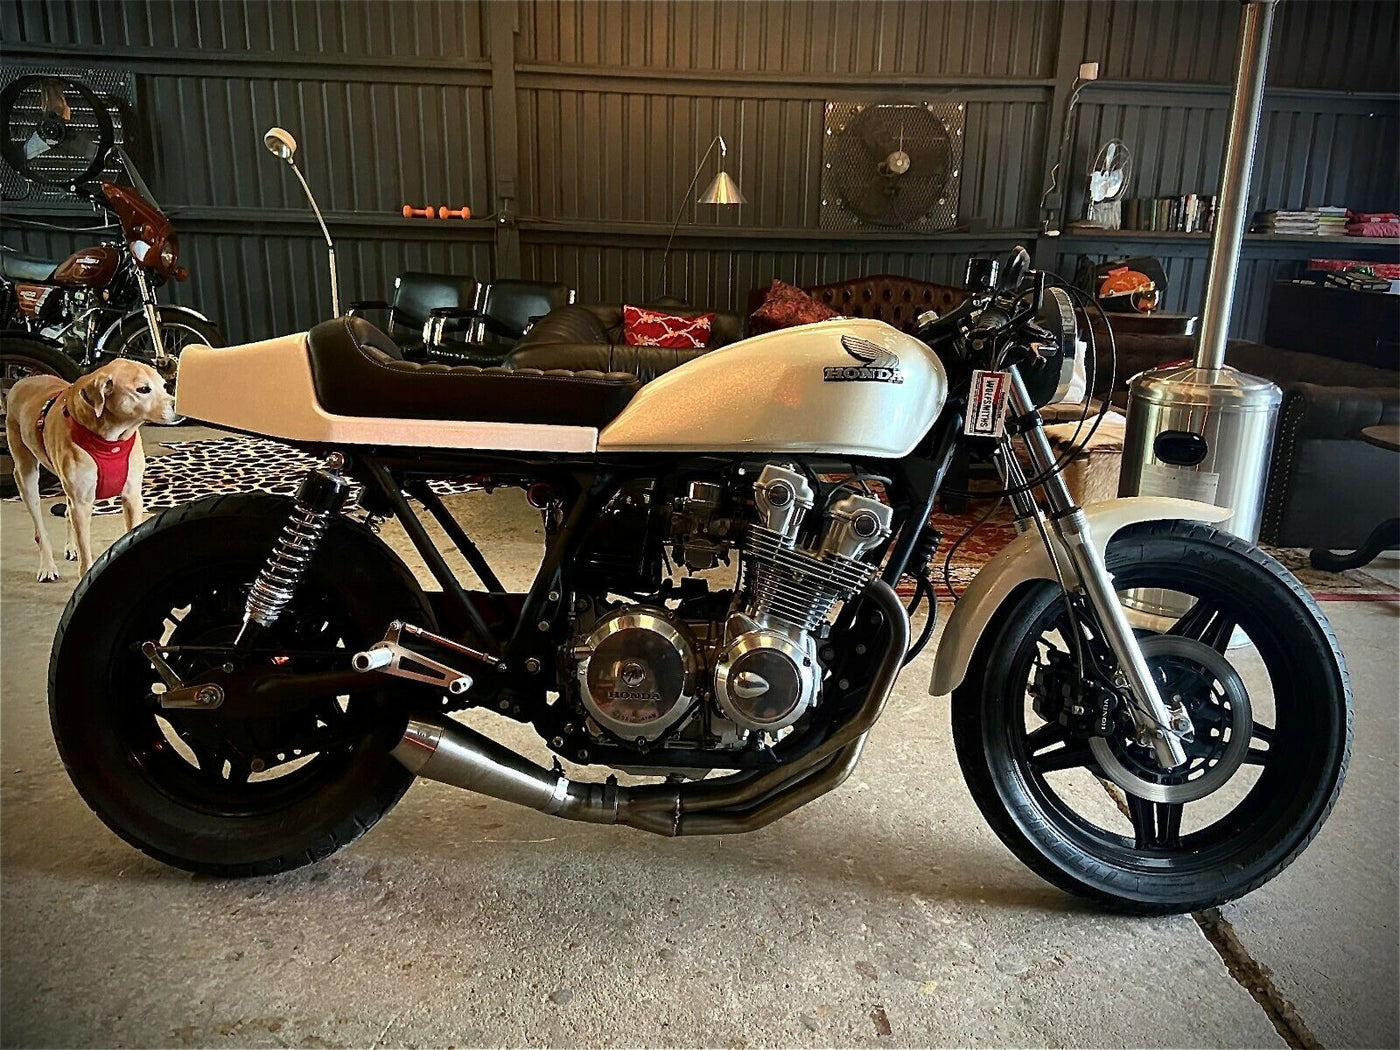 1981 Honda CB750 Cafe Racer Motorcycle For Sale Houston Texas Wolfsmiths Heights